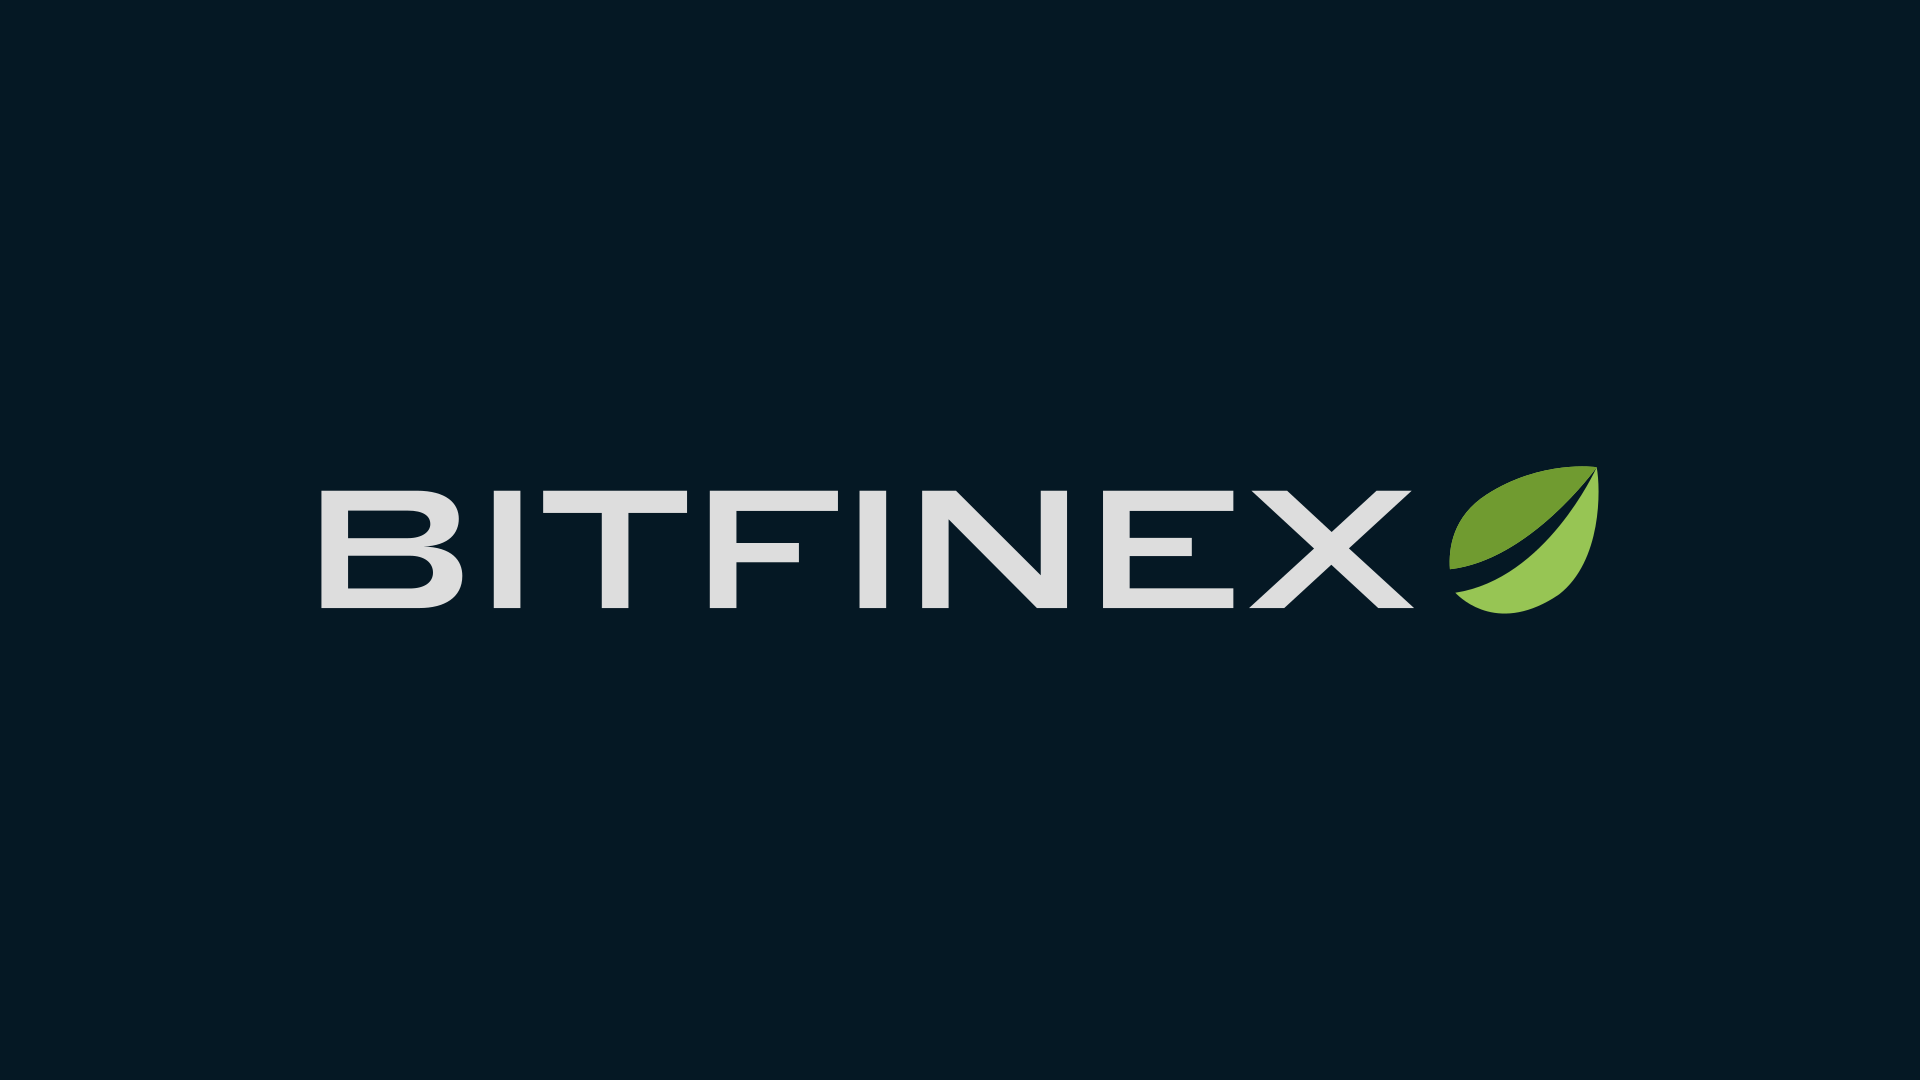 Banks are running away and Bitfinex is struggling with ...